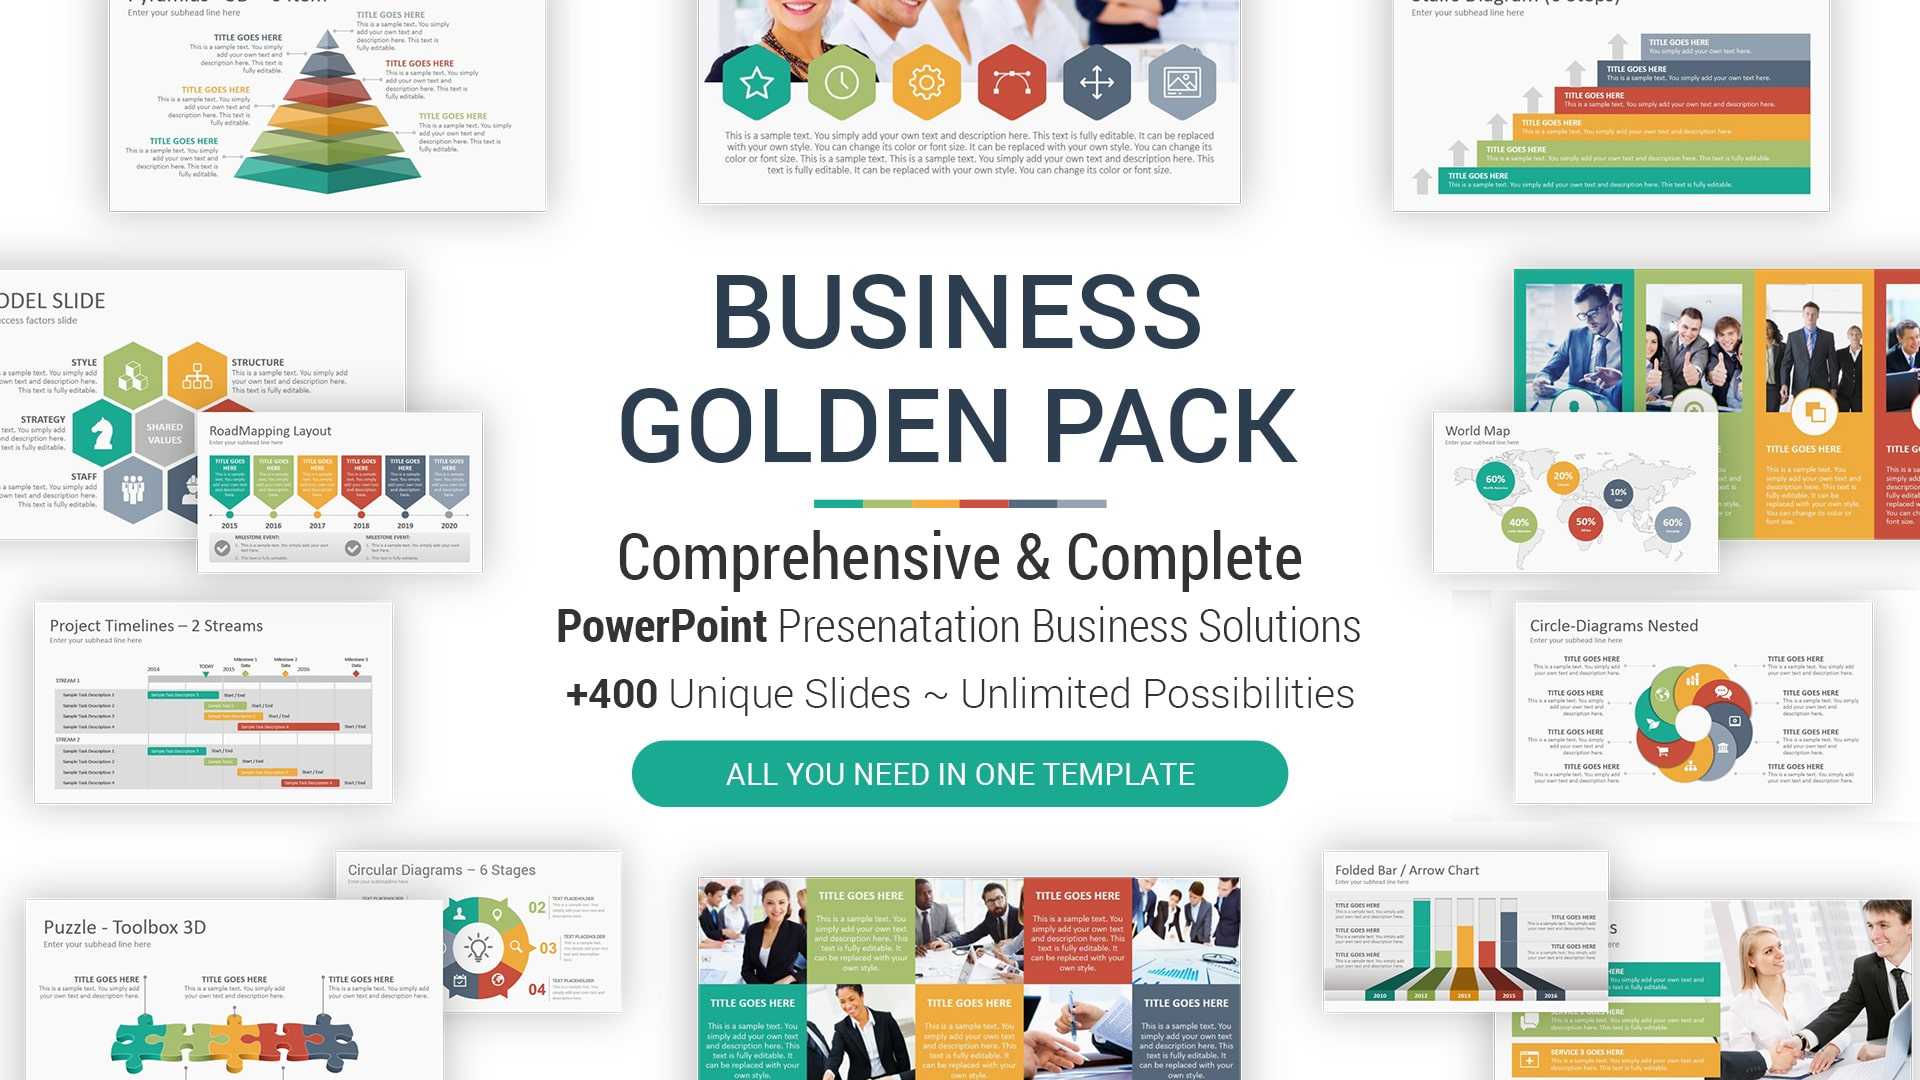 40+ Animated Powerpoint (Ppt) Templates For Presentations With Regard To Pretty Powerpoint Templates